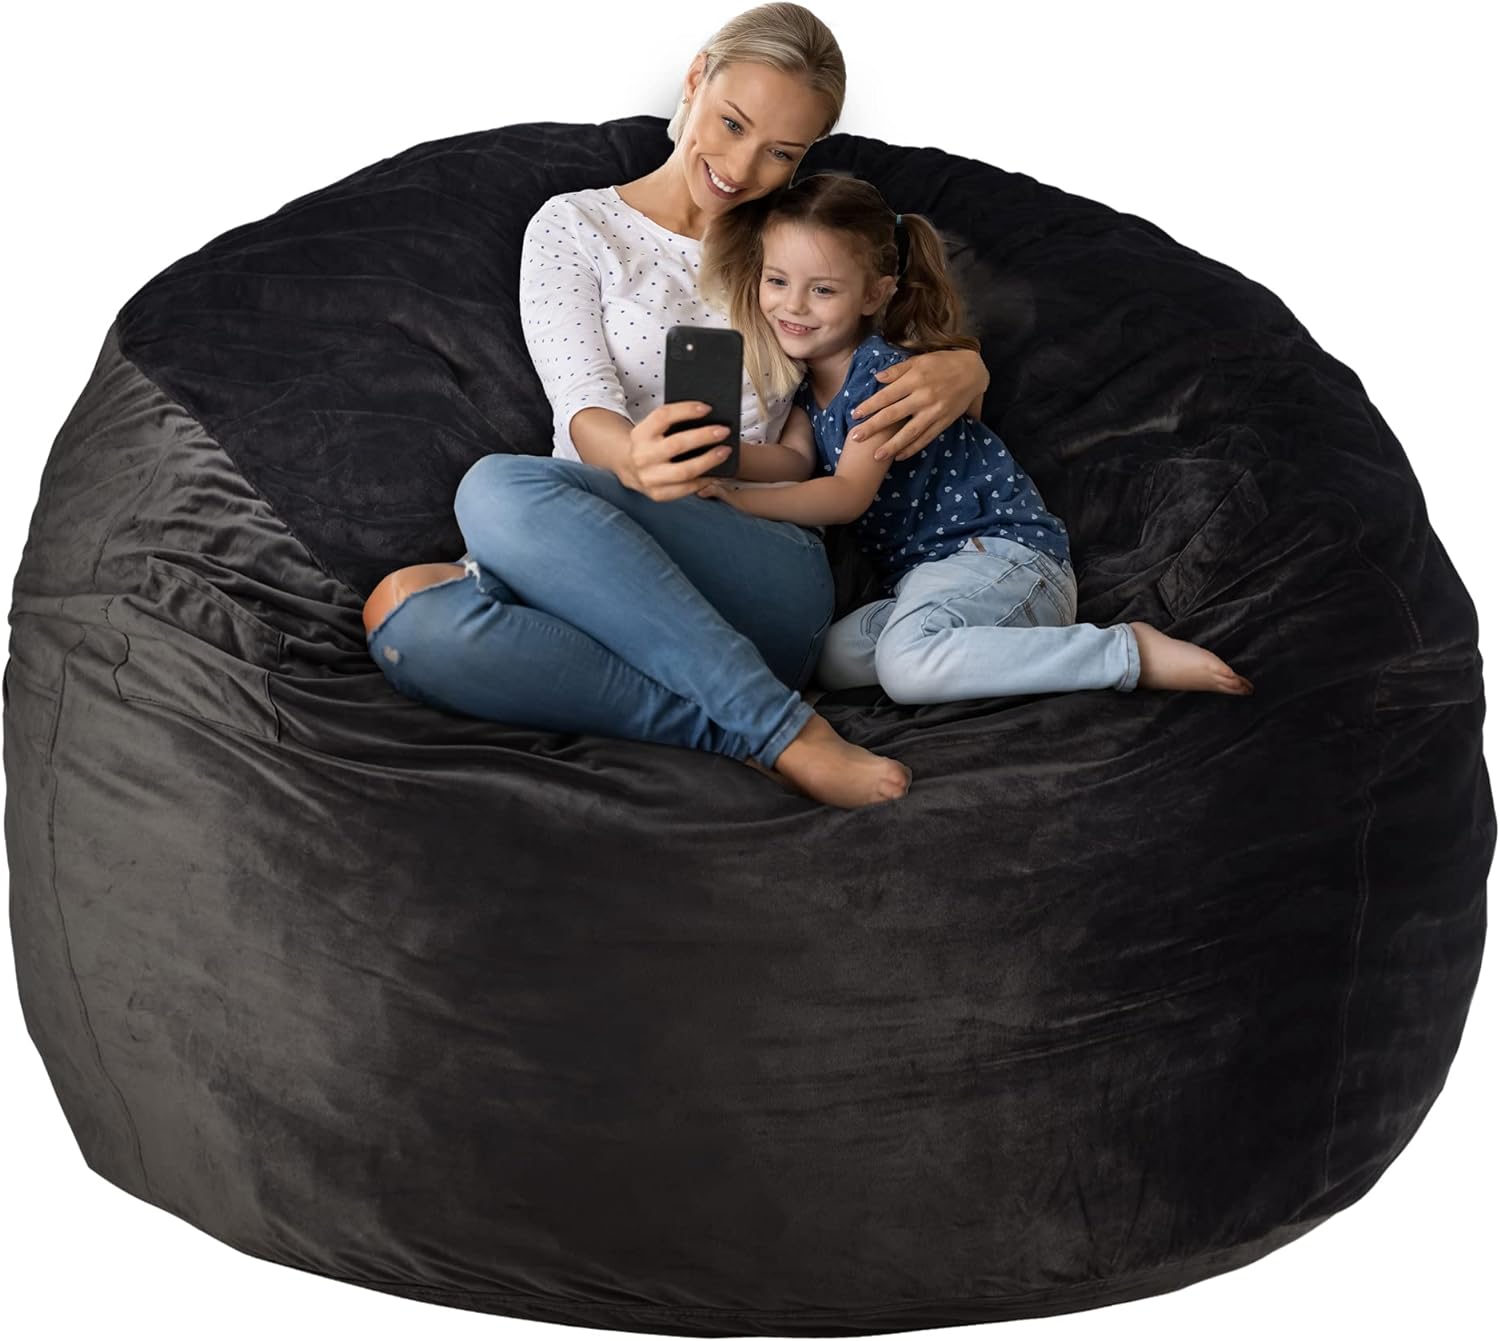 HABUTWAY Bean Bag Chair: Giant 5' Memory Foam Furniture Bean Bag Chairs for Adults with Microfiber Cover - 5Ft,Black